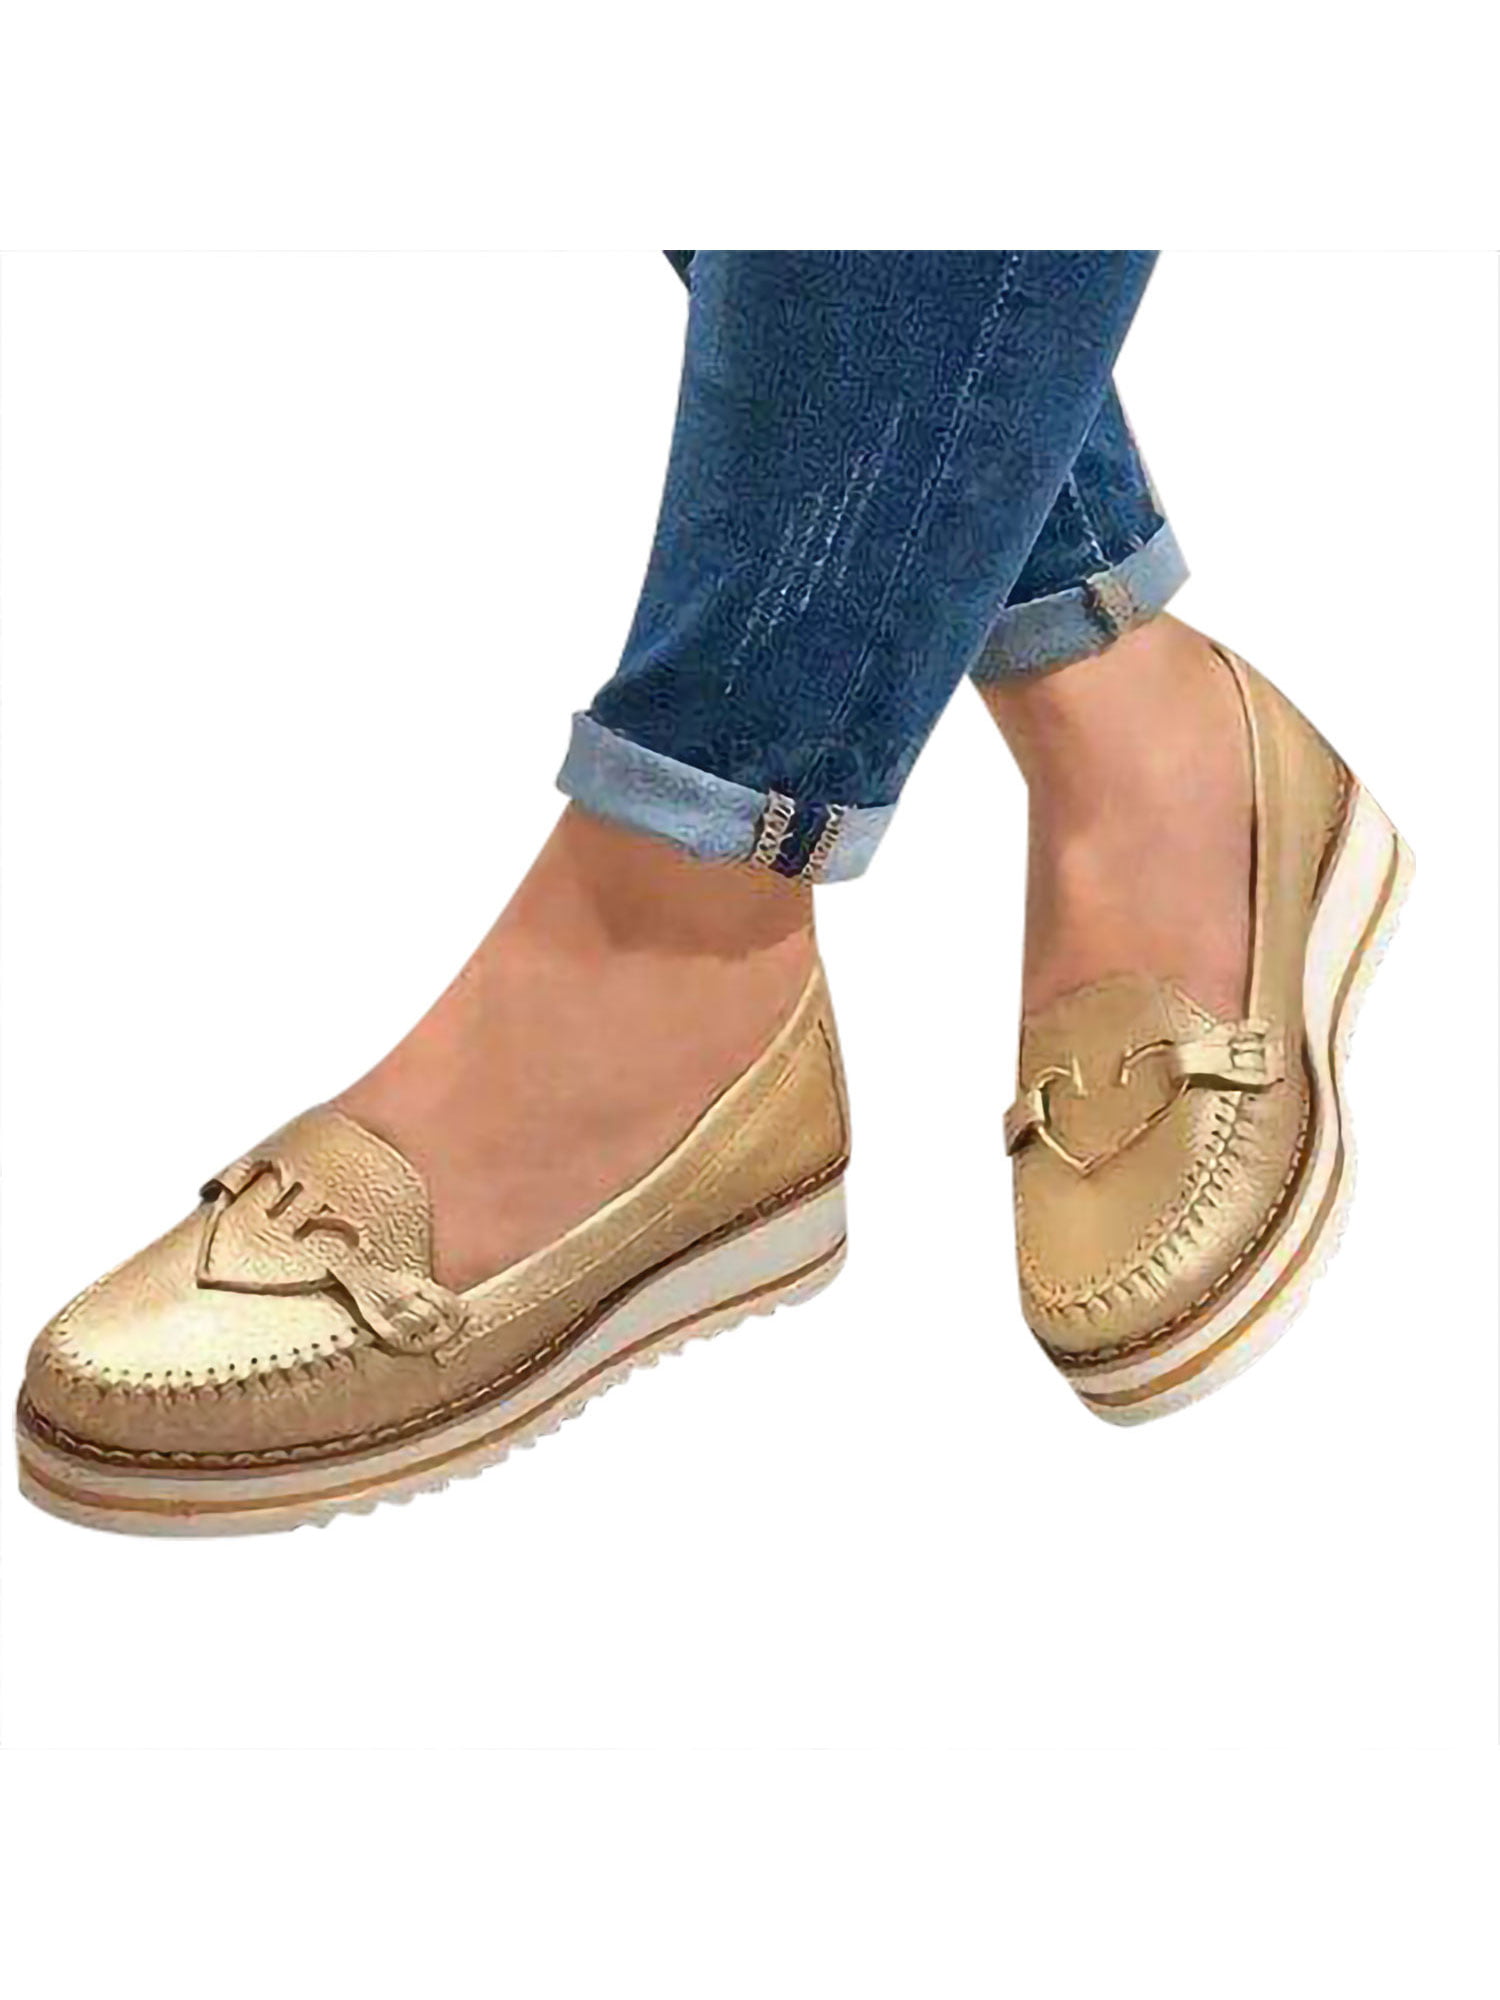 New Lady Foldable Ballet Flats Bowknot Slip On Simple Style Flat Shoes For Mommy 